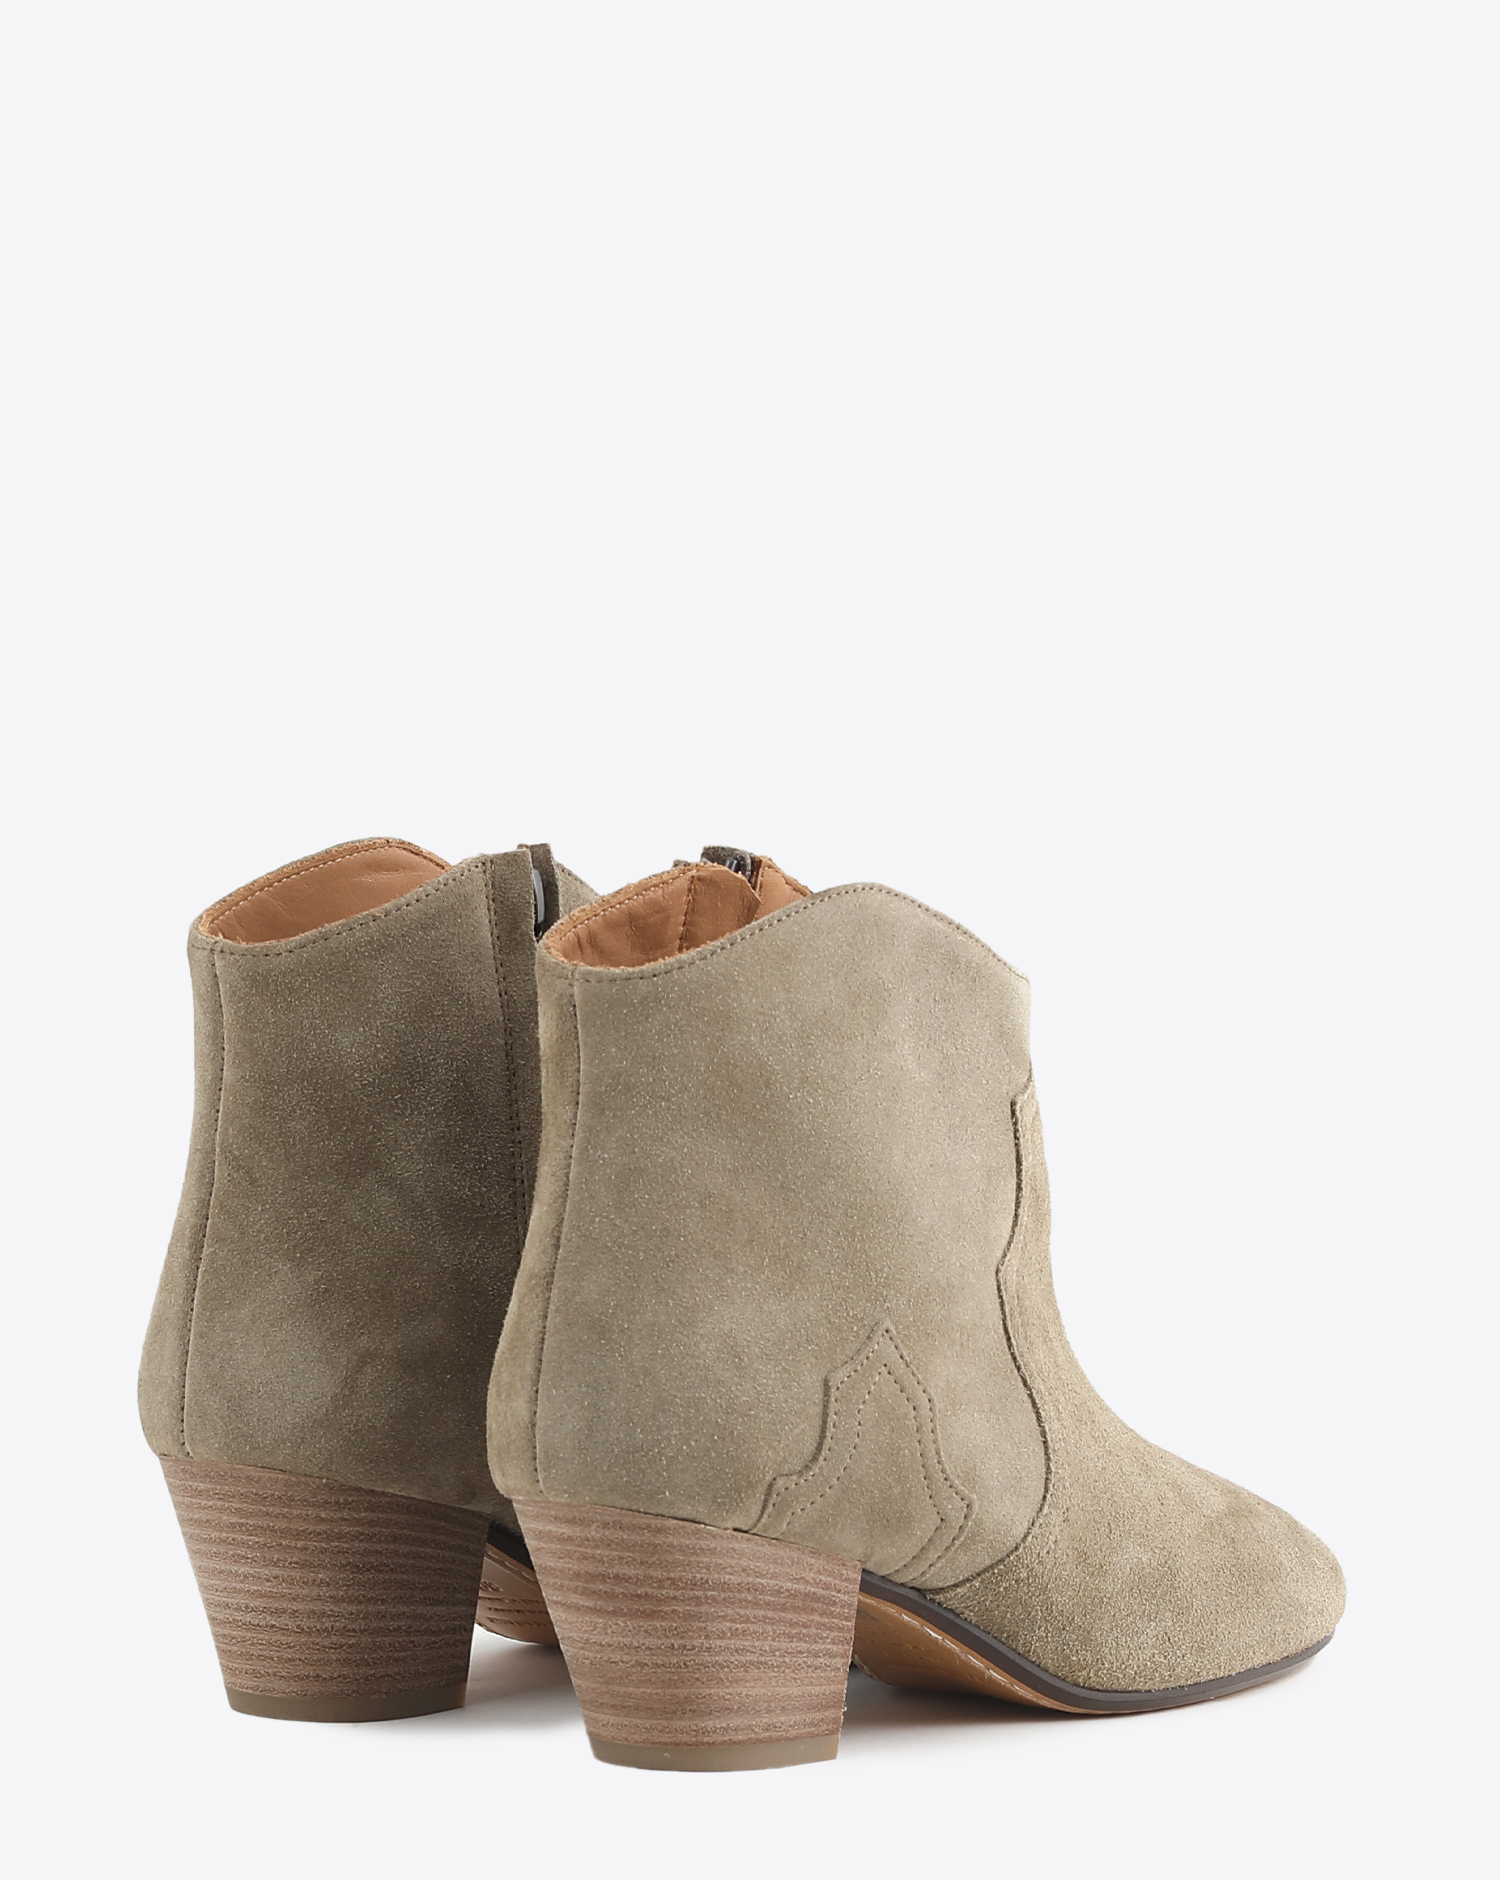 Boots Dicker taupe Isabel Marant 